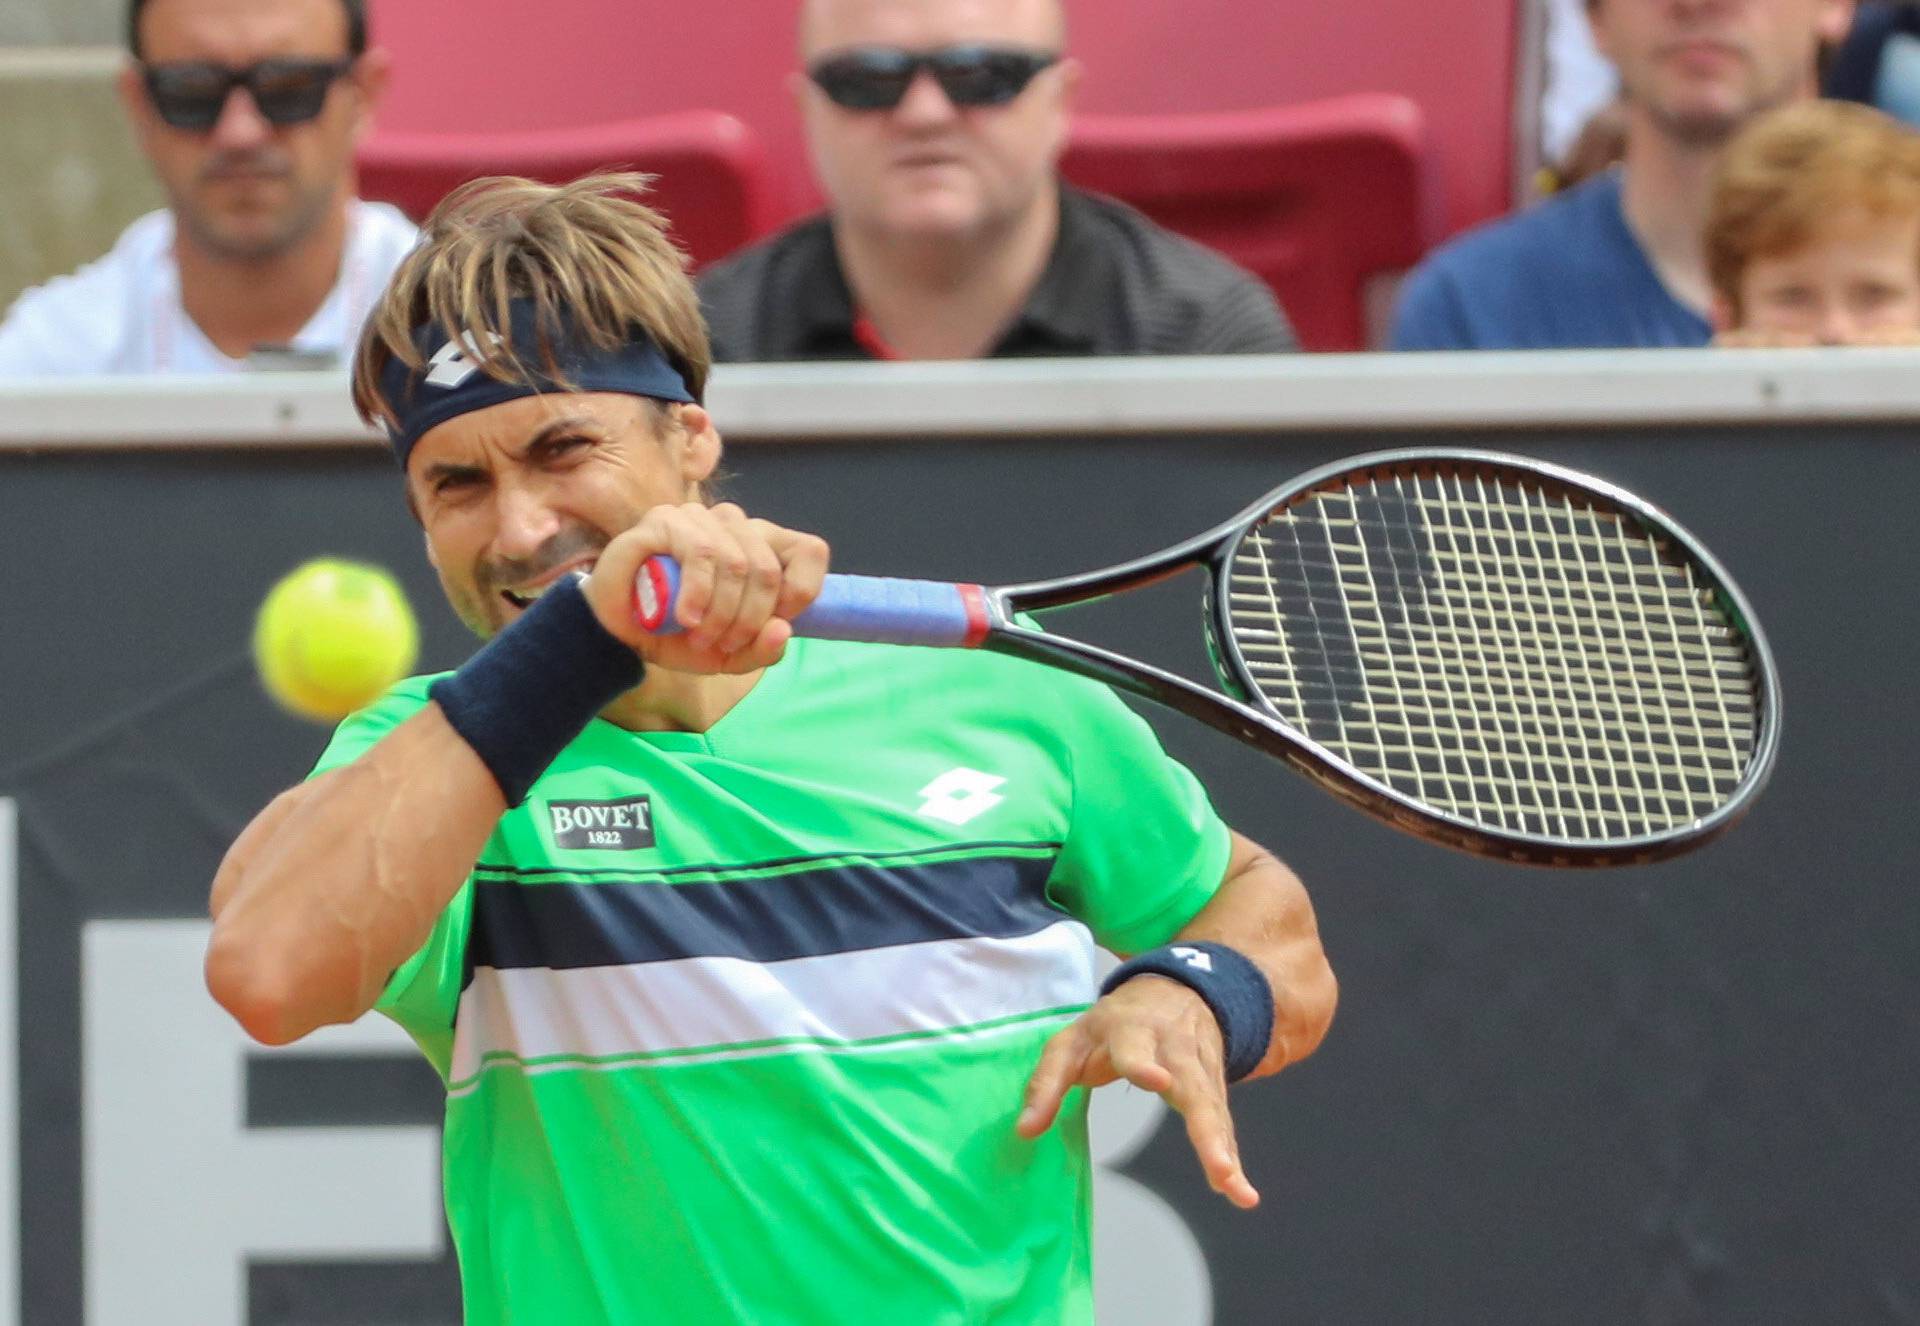 David Ferrer of Spain in action in the semifinal match against Fernando Verdasco, also of Spain, during the ATP tennis tournament Swedish Open in Bastad